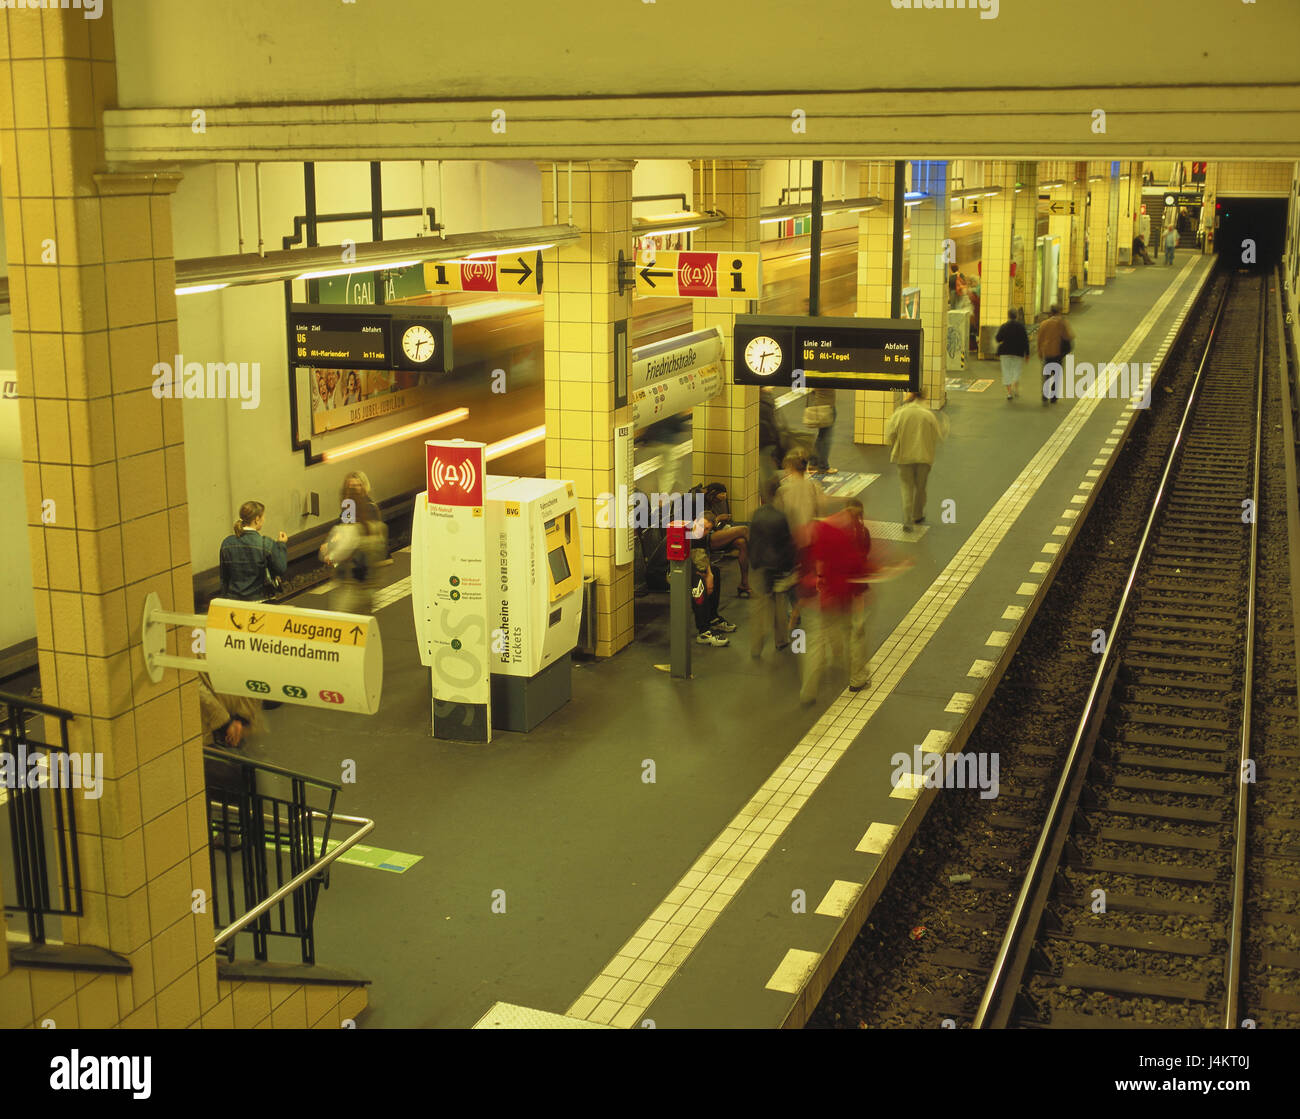 Germany, Berlin, Friedrichstrasse, subway station, passengers, blur Europe, town, capital, part of town, public transit, publicly, town traffic, traffic, short-distance traffic, passenger traffic, transportation of human beings, underground, railway station, stop, platform, passengers Stock Photo